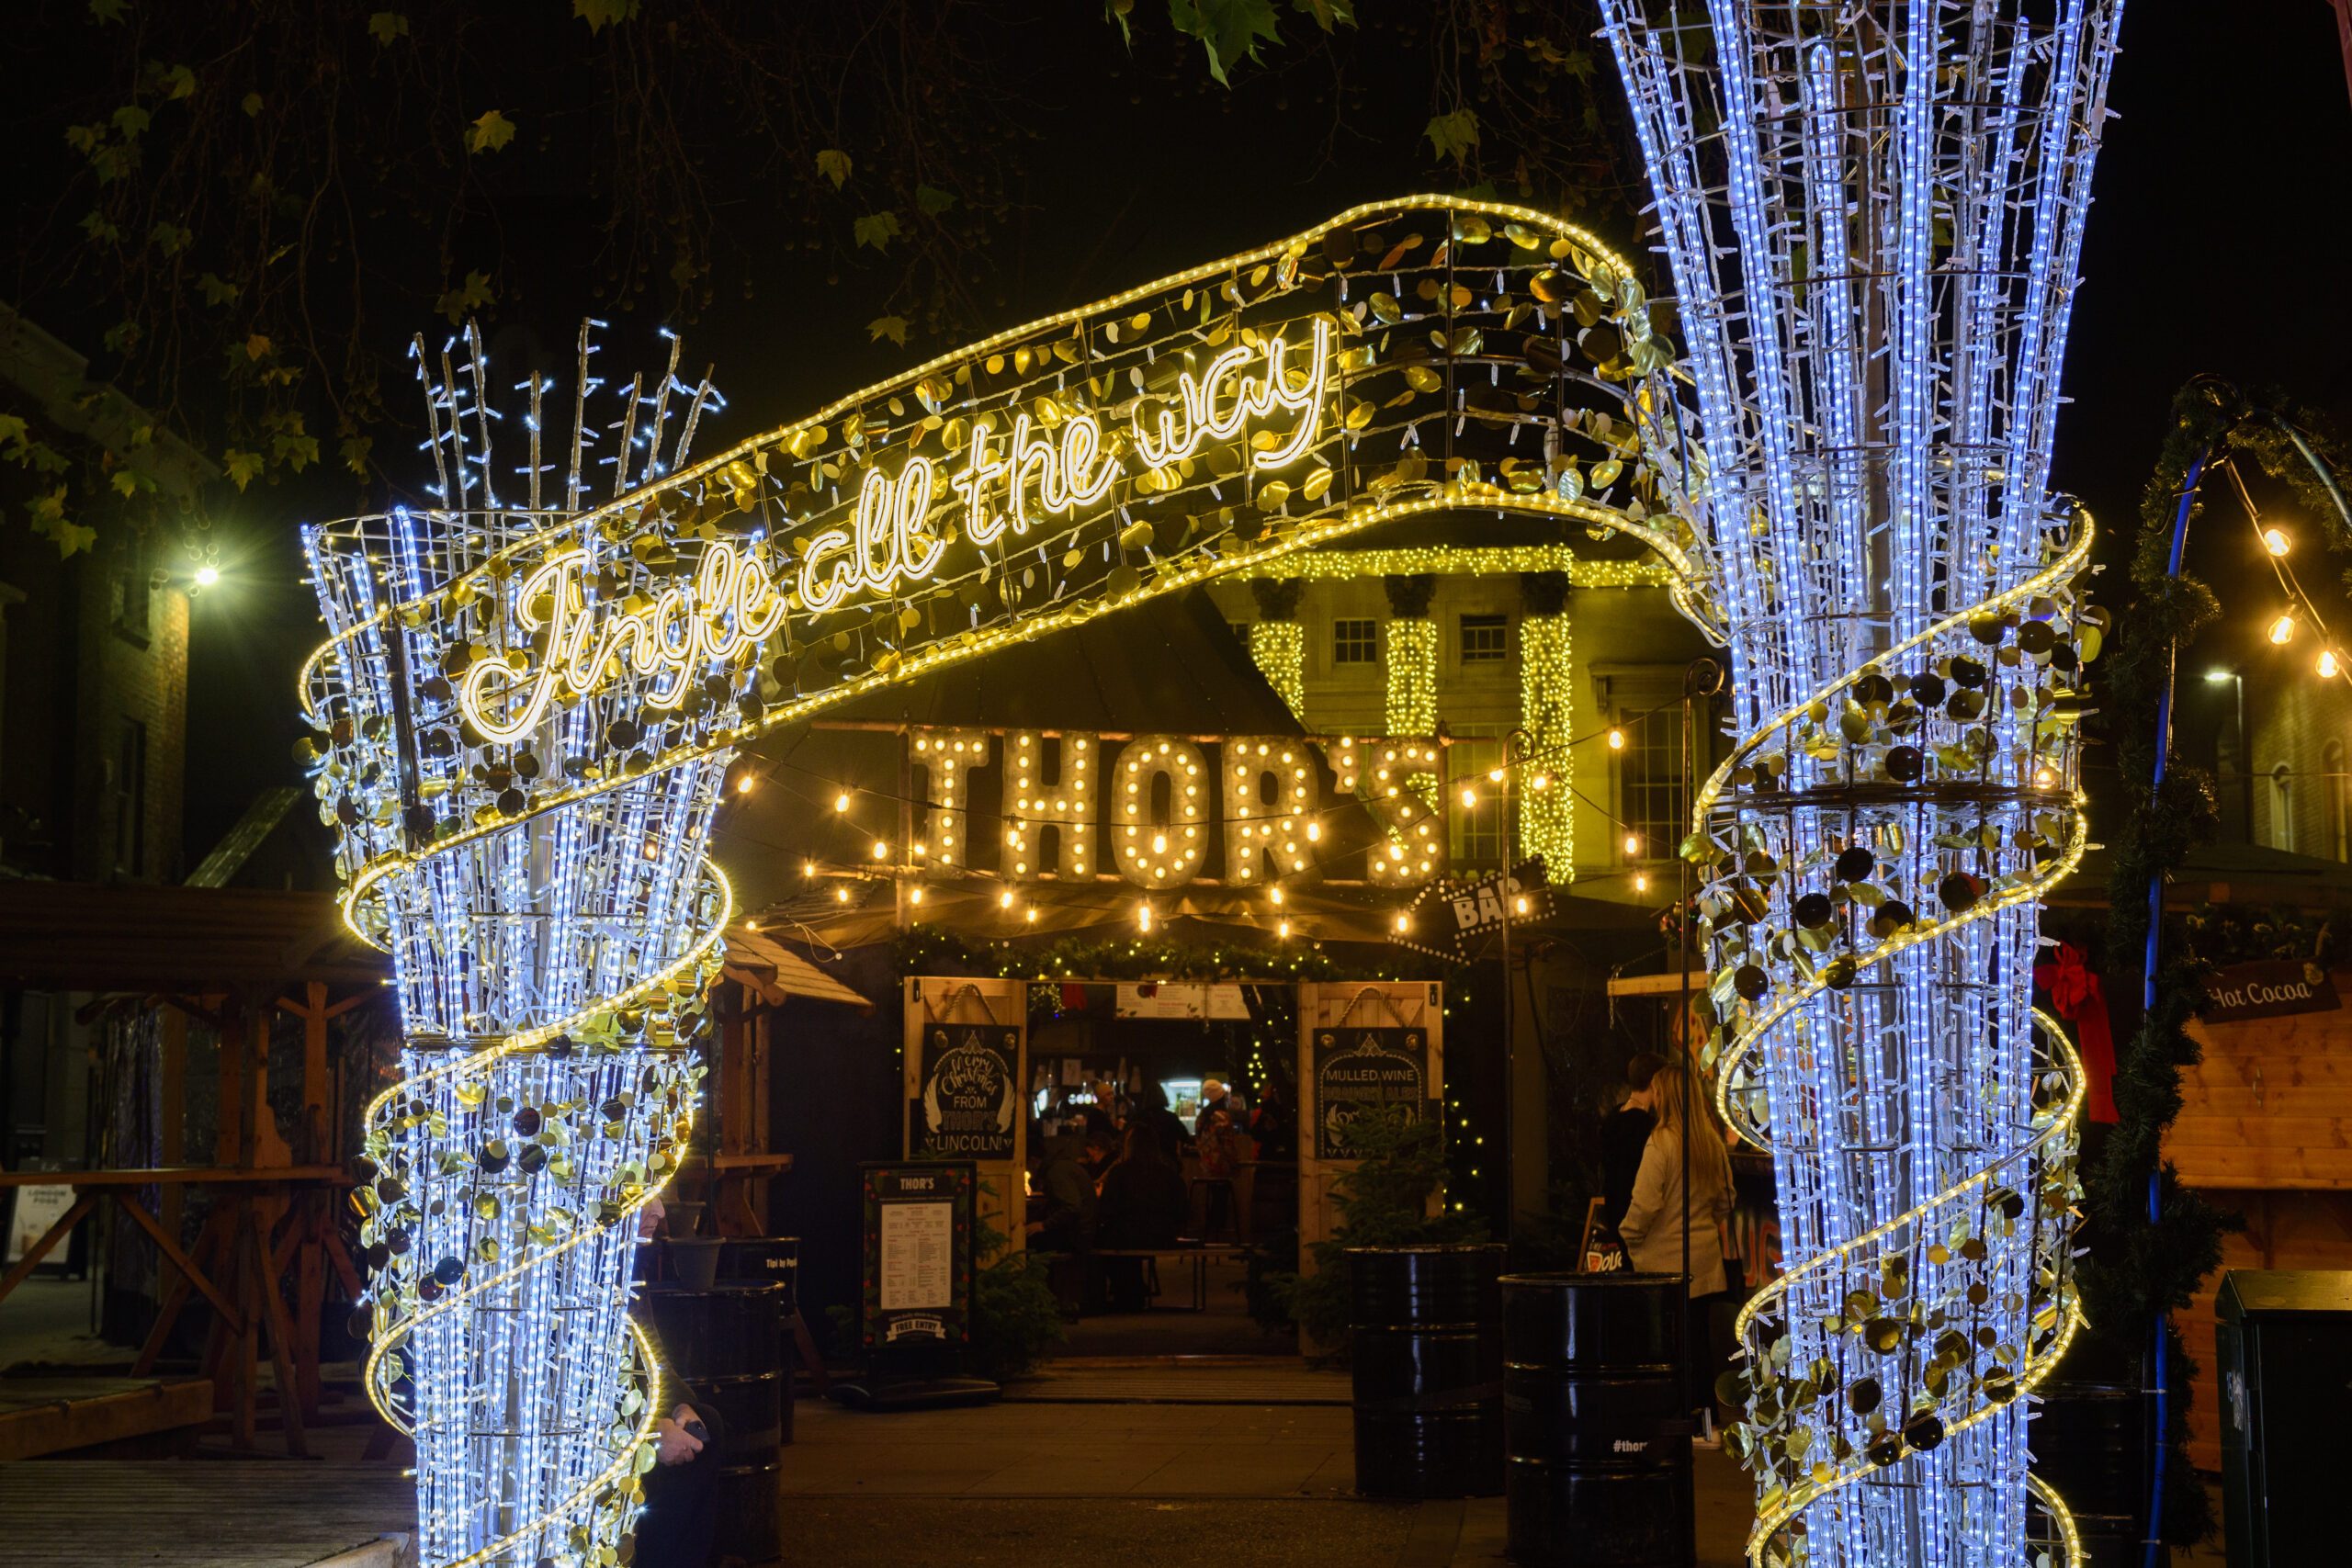 Jingle all the way light-up 3D Motif to highlight the entrance to Thor's seasonal pop-up bar in Lincoln.